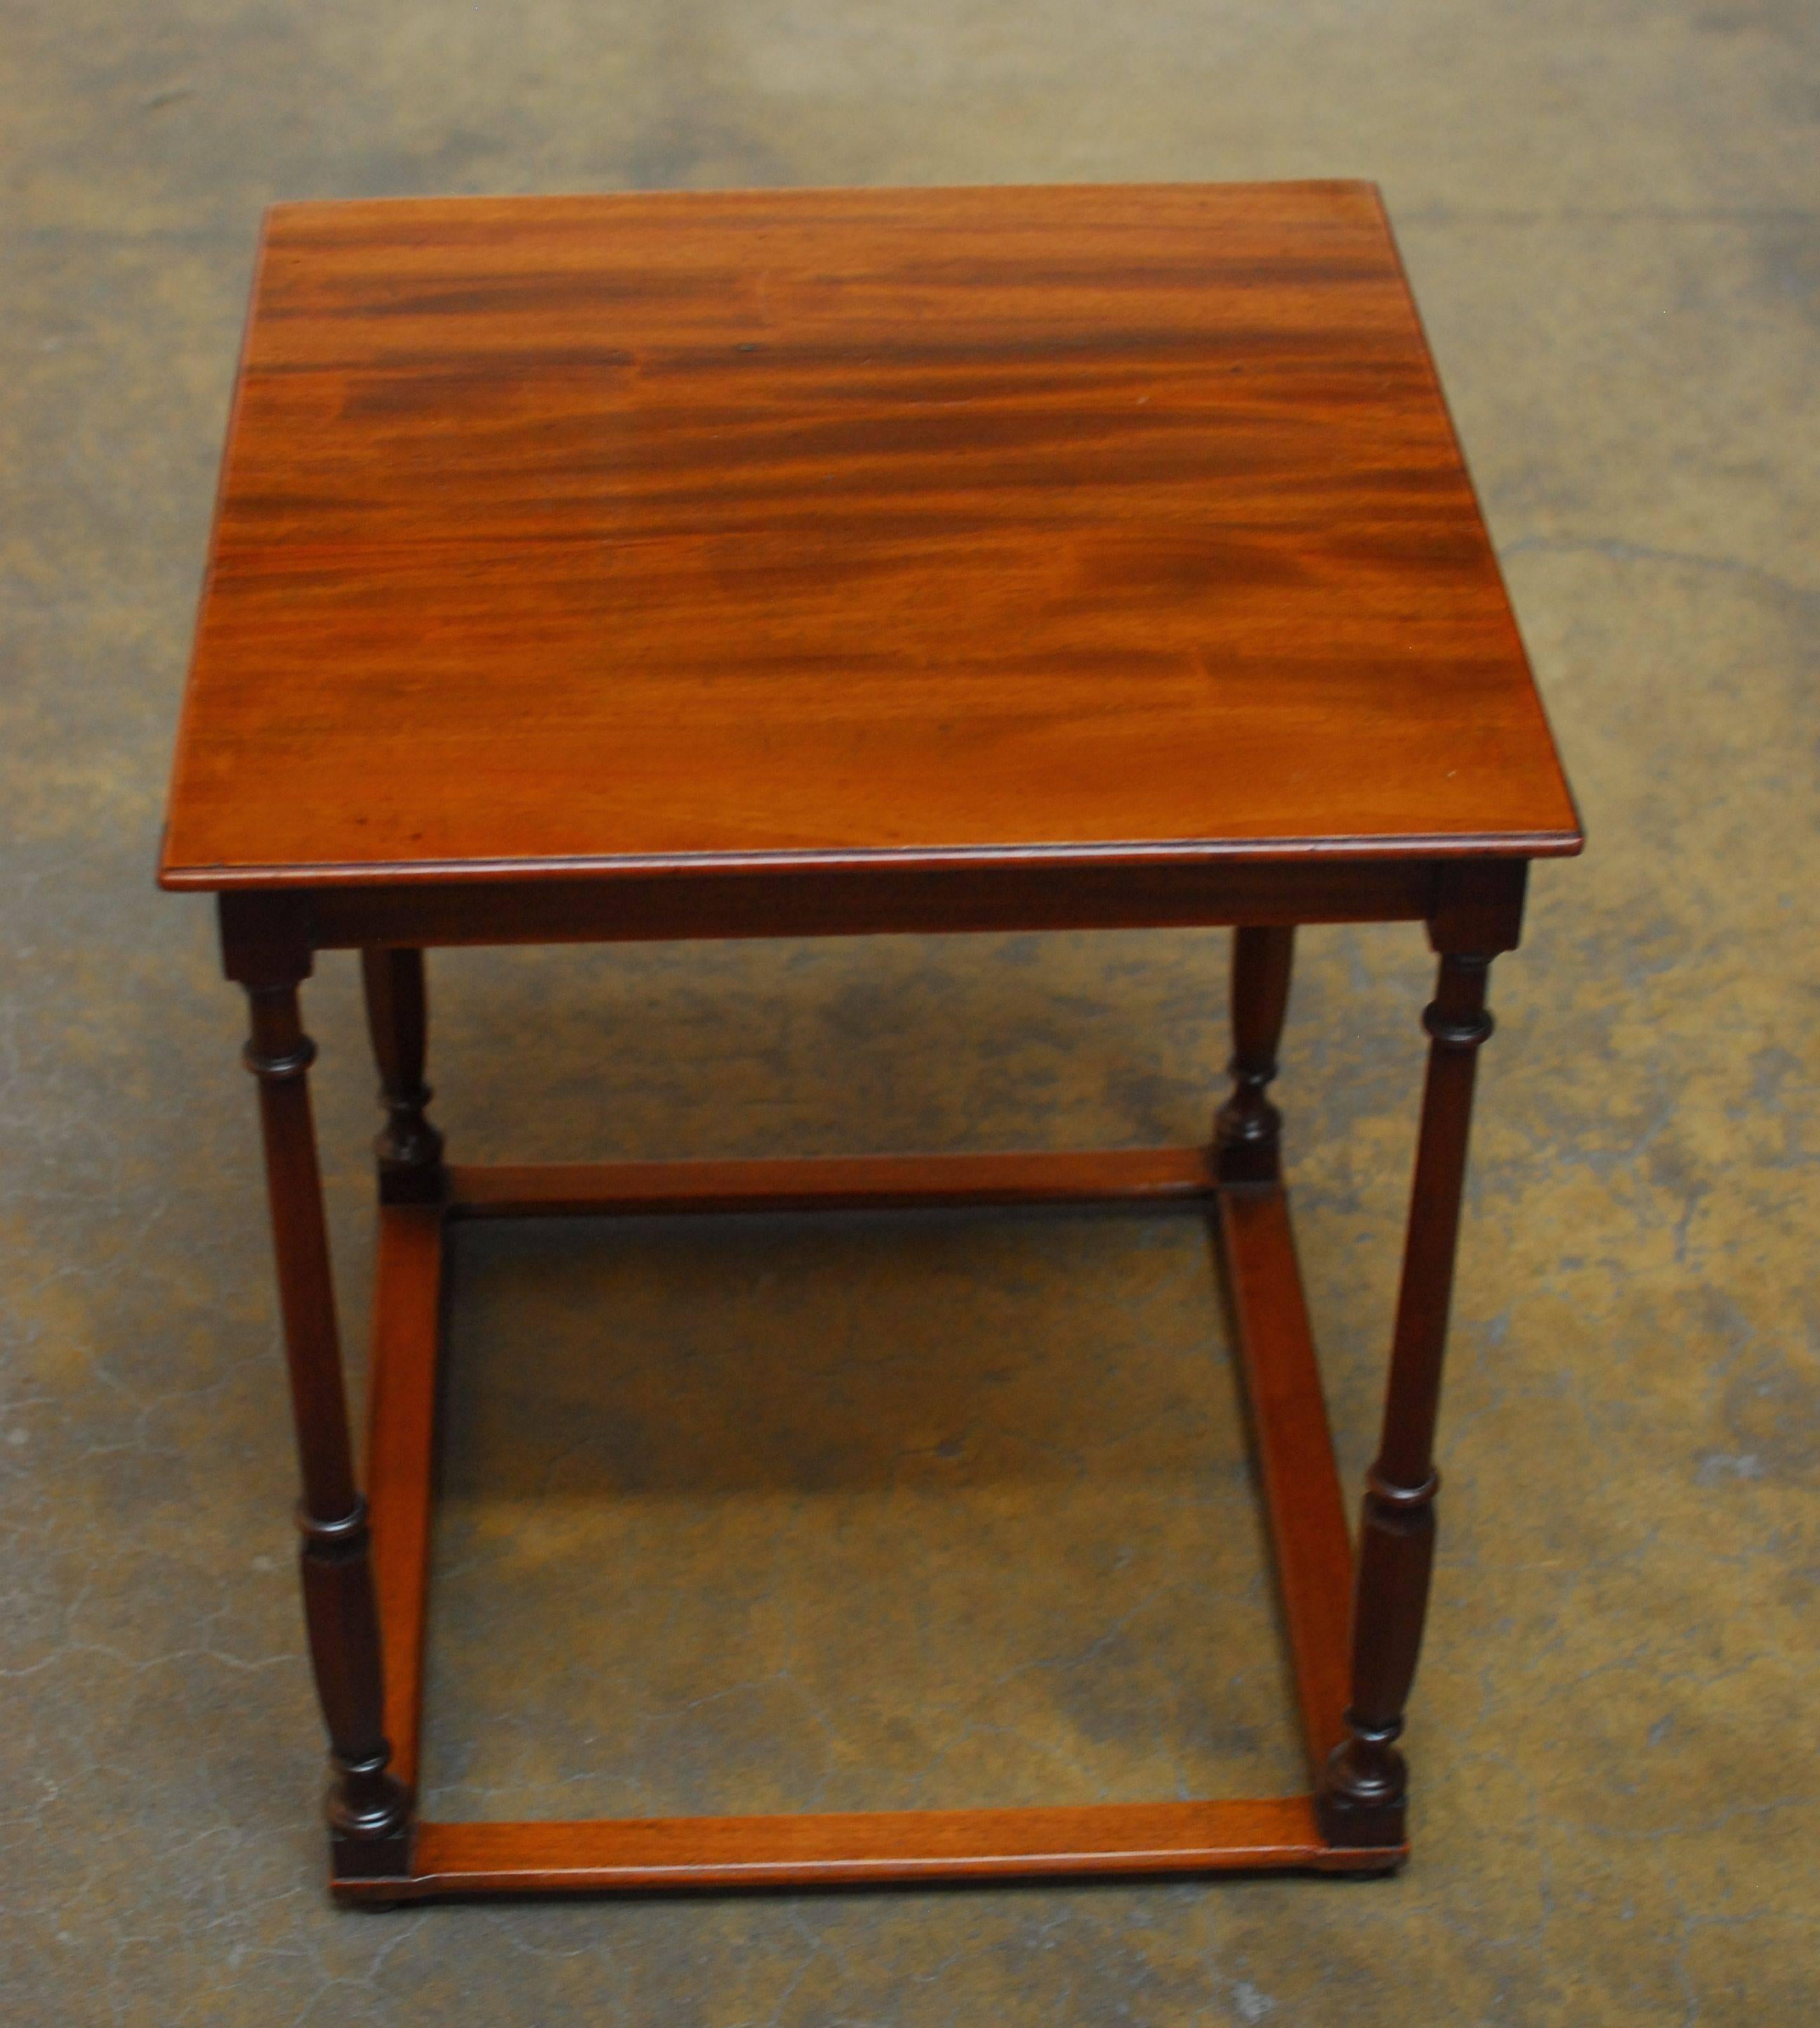 Rare English mahogany pub table or side table sitting on delicate turned legs with a flat box stretcher base. Finished with deep mahogany legs and a contrasting lighter top and bottom.
  